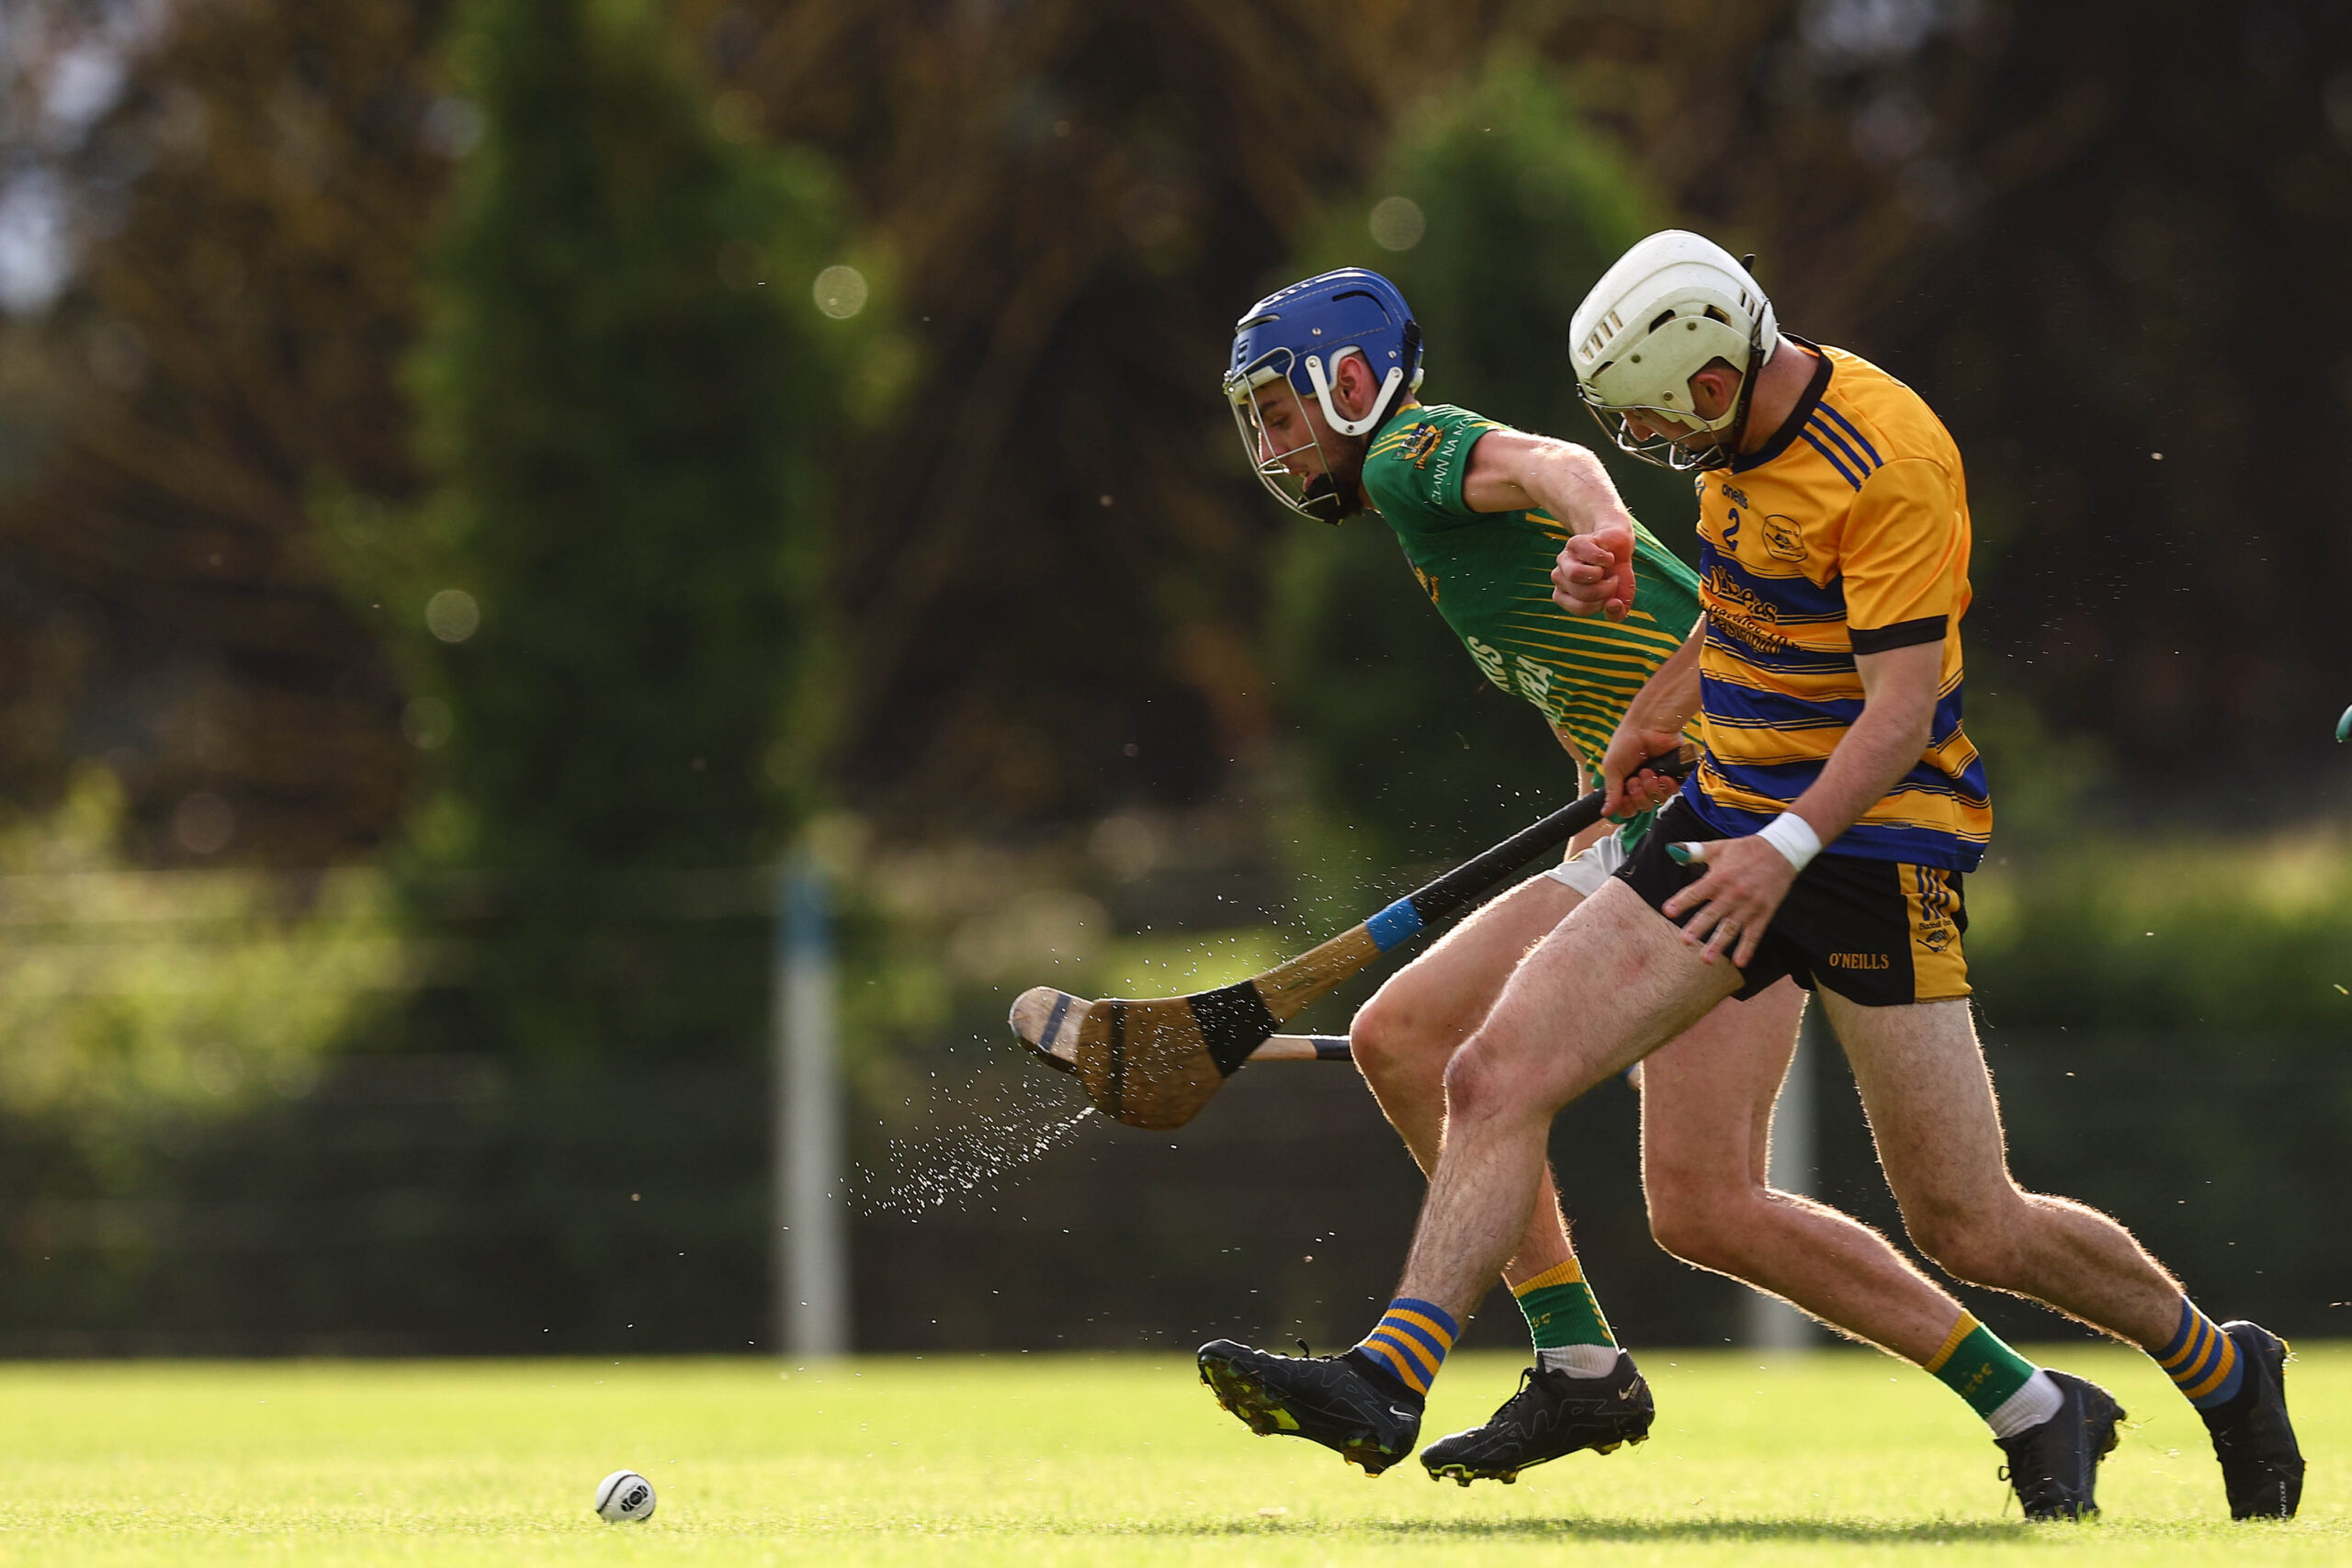 Who will join Blackhall Gaels in the quarter finals?